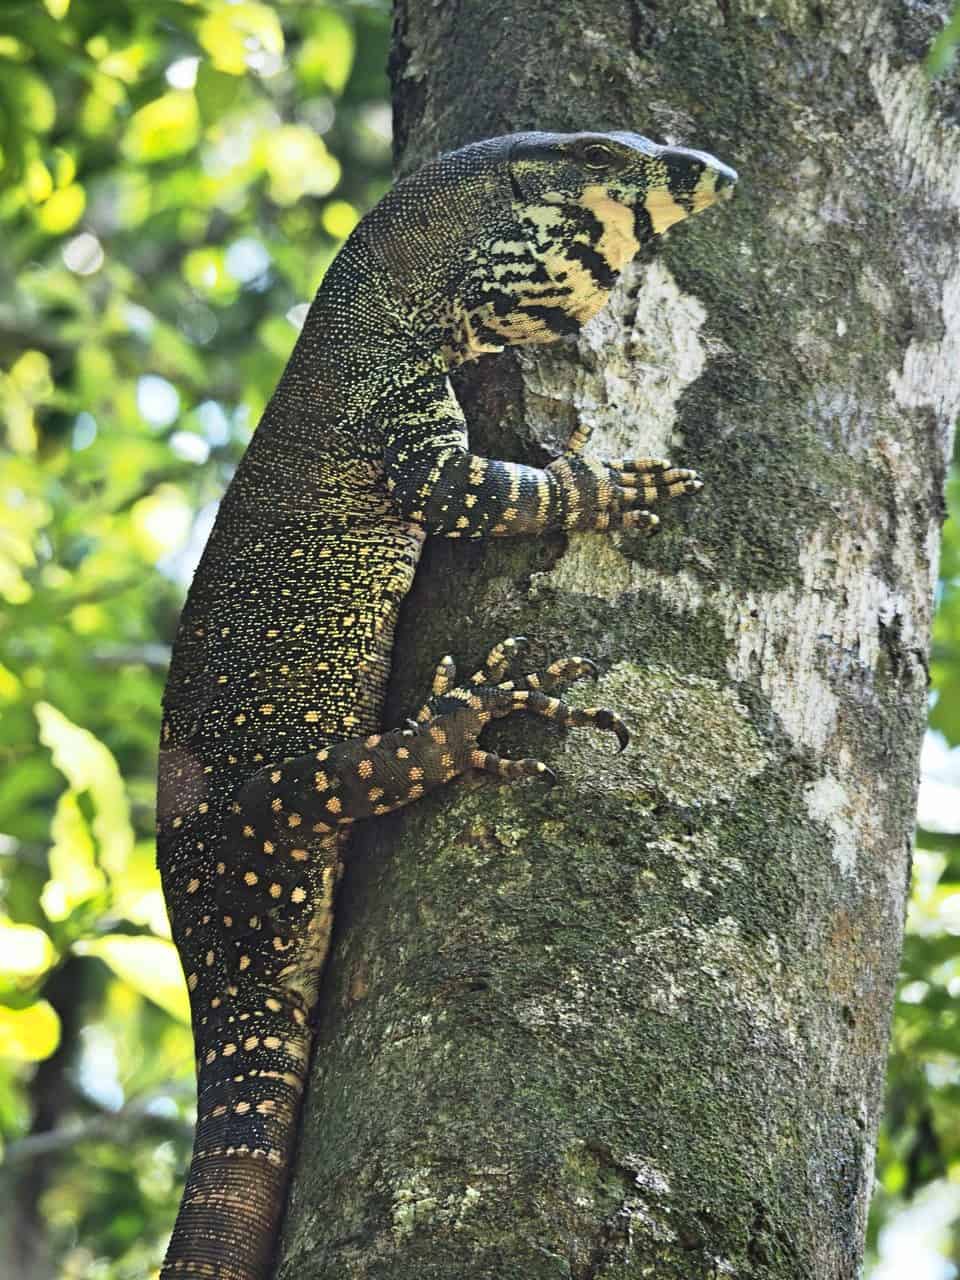 A lace monitor in the Daintree Rainforest, Australia // Travel Mermaid